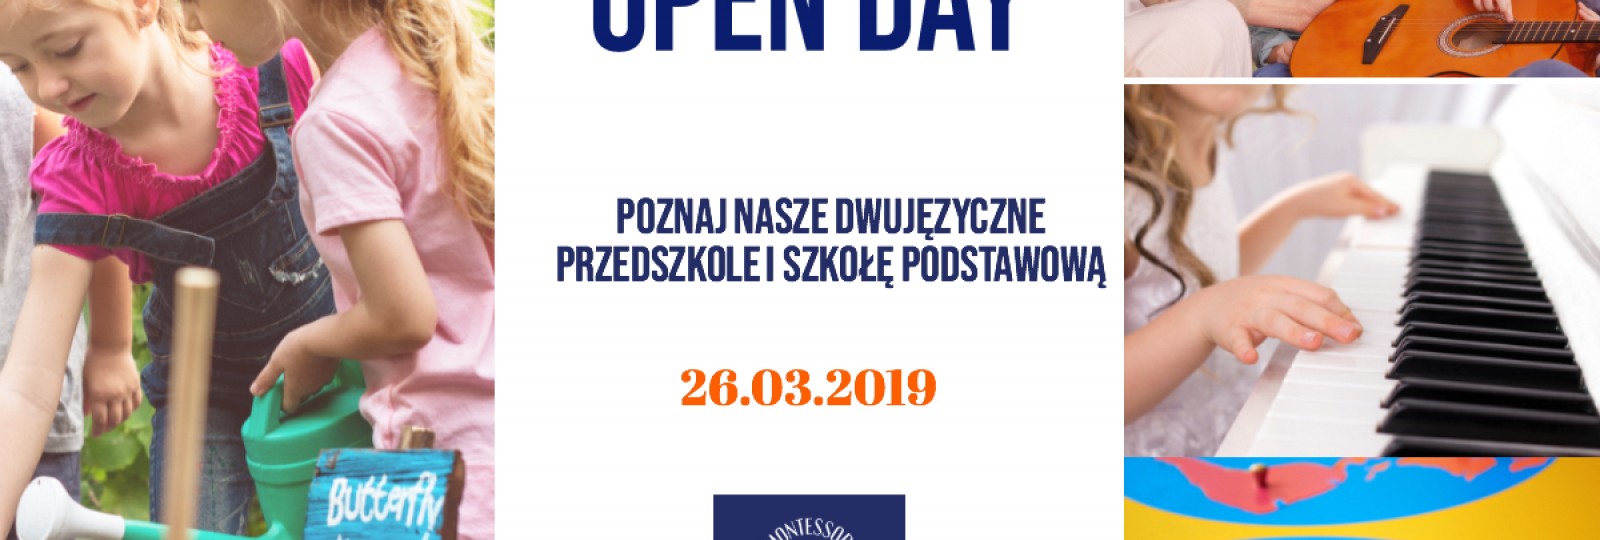 Open Day 26.03.2019 